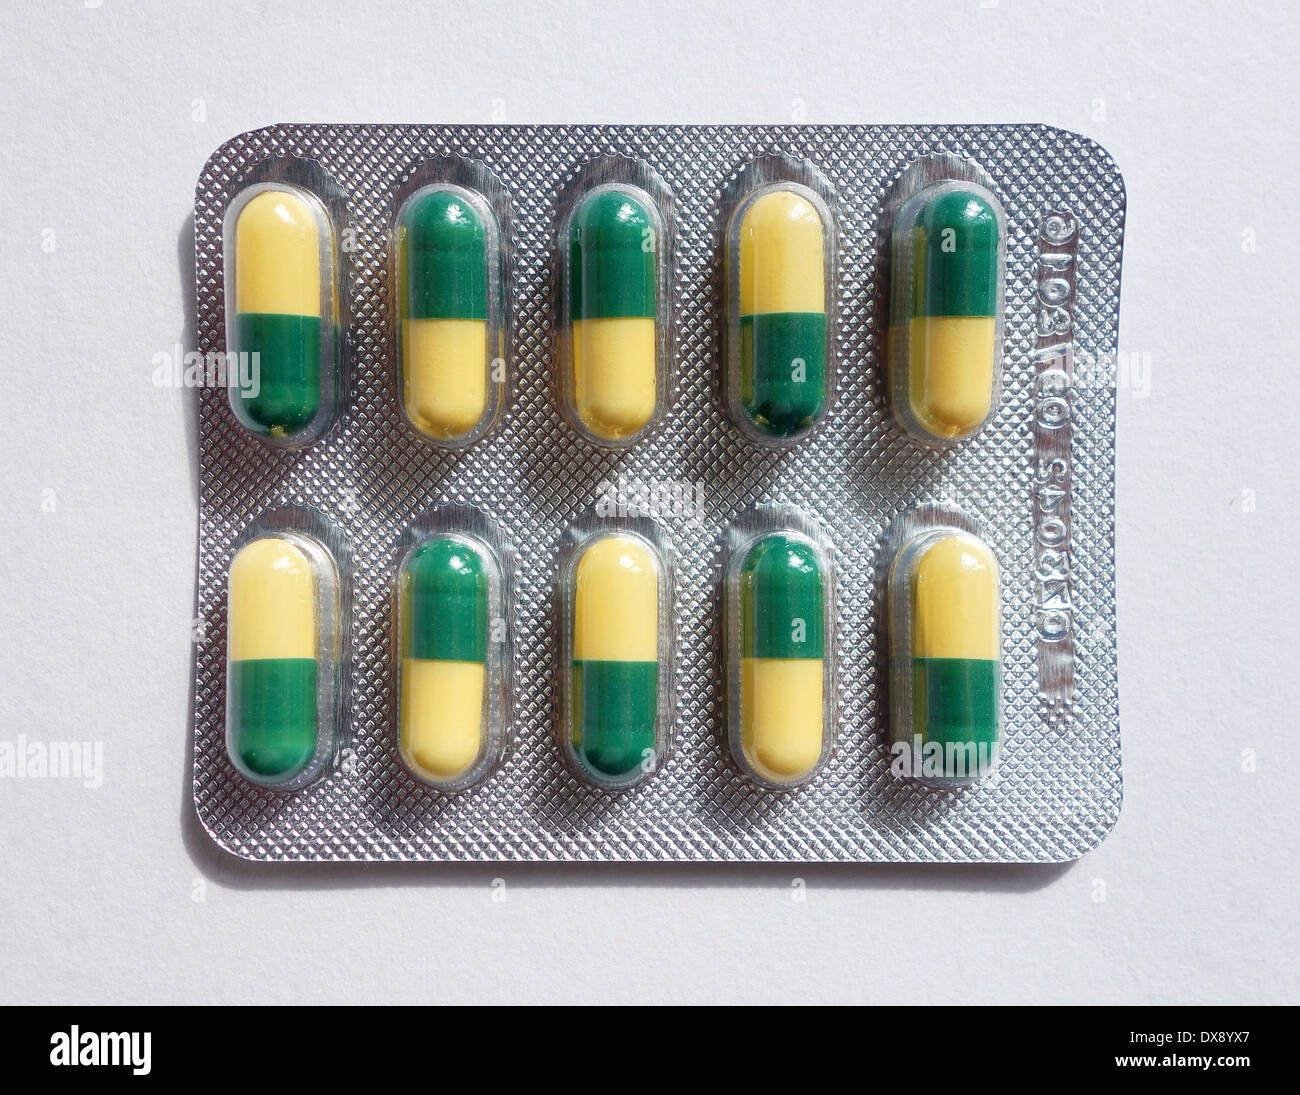 Tramadol capsules and yellow green